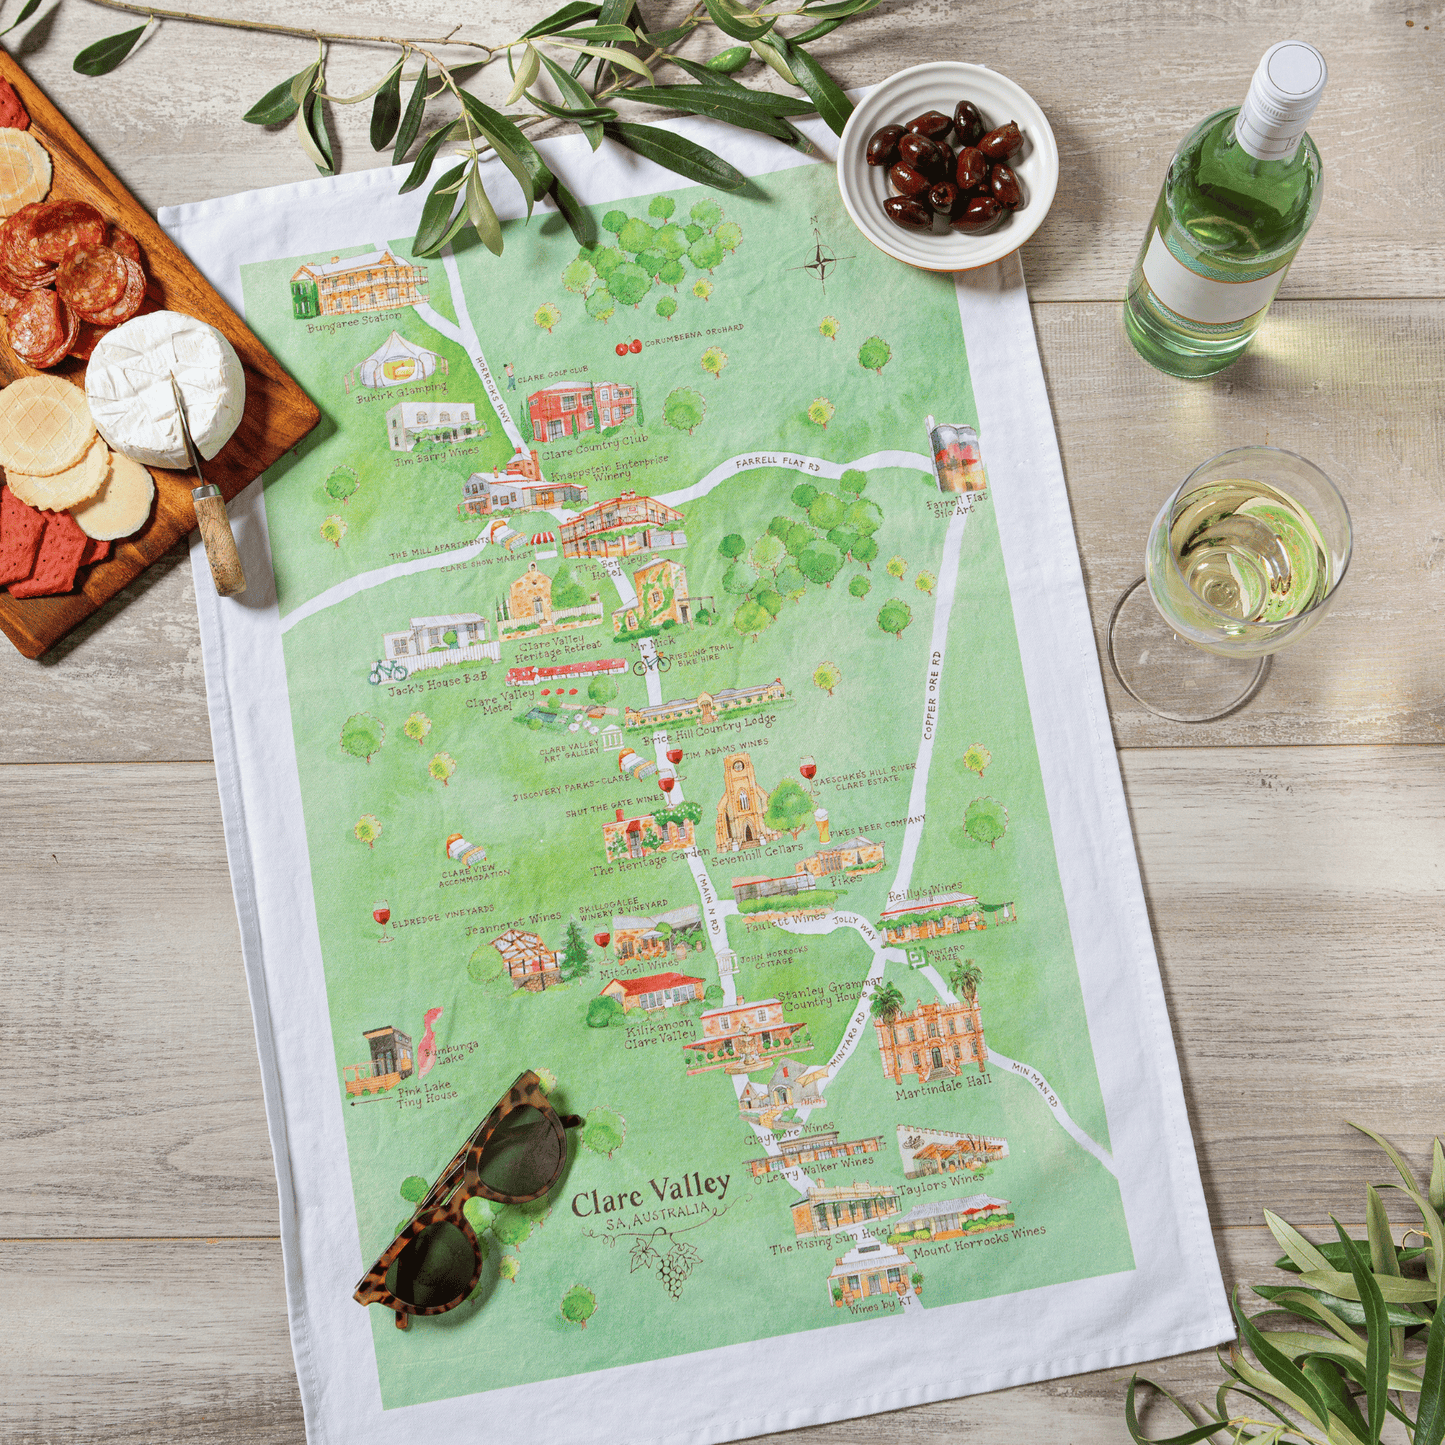 Clare Valley wine region map tea towel styled